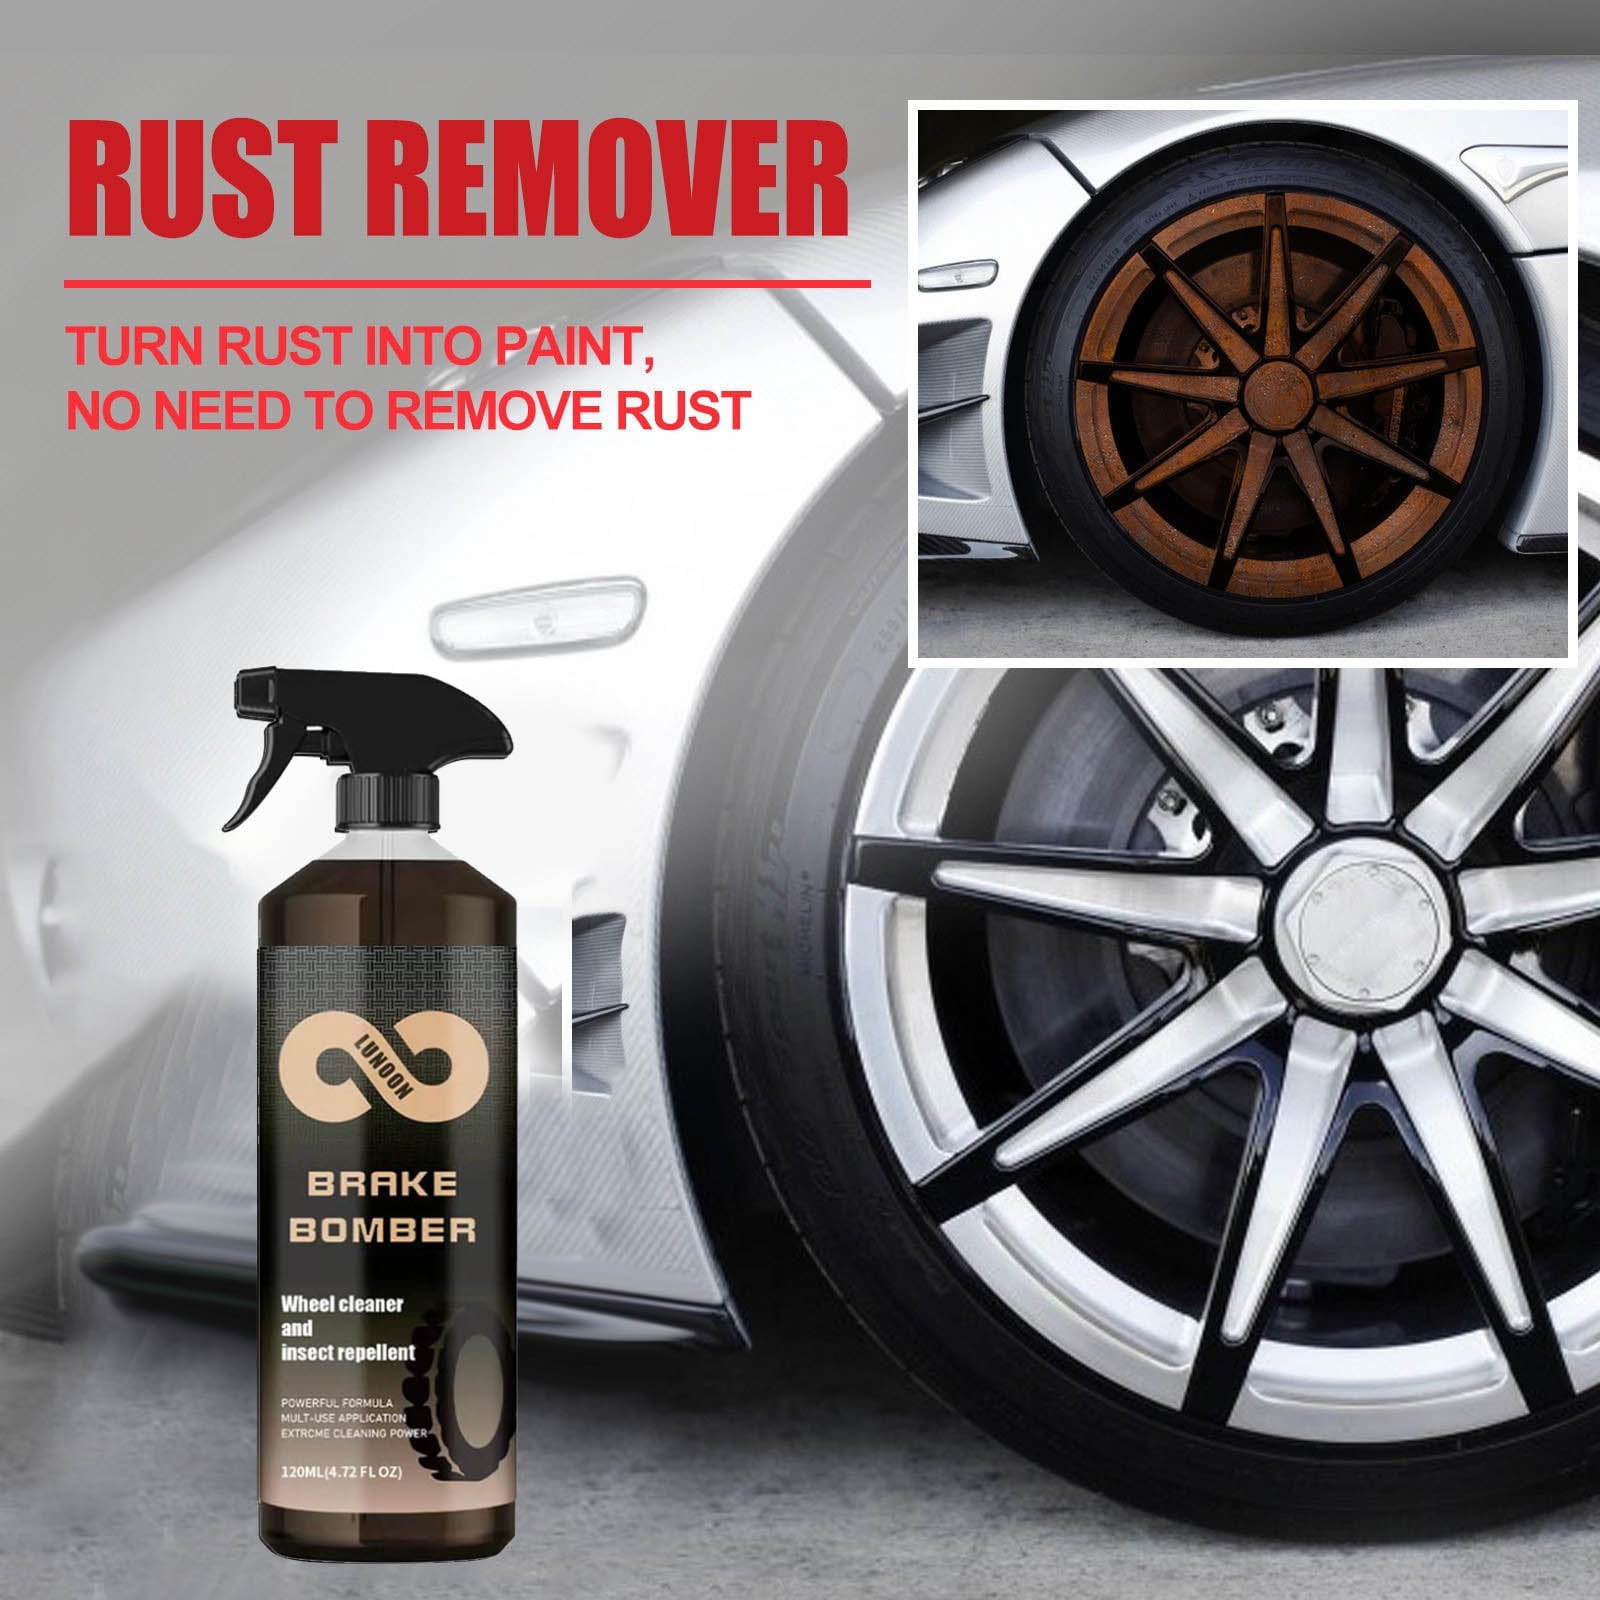 Stealth Garage Brake Bomber™ - Powerful Non-Acid Truck & Car Wheel Cleaner  and Bug Remover - Moonqo Store